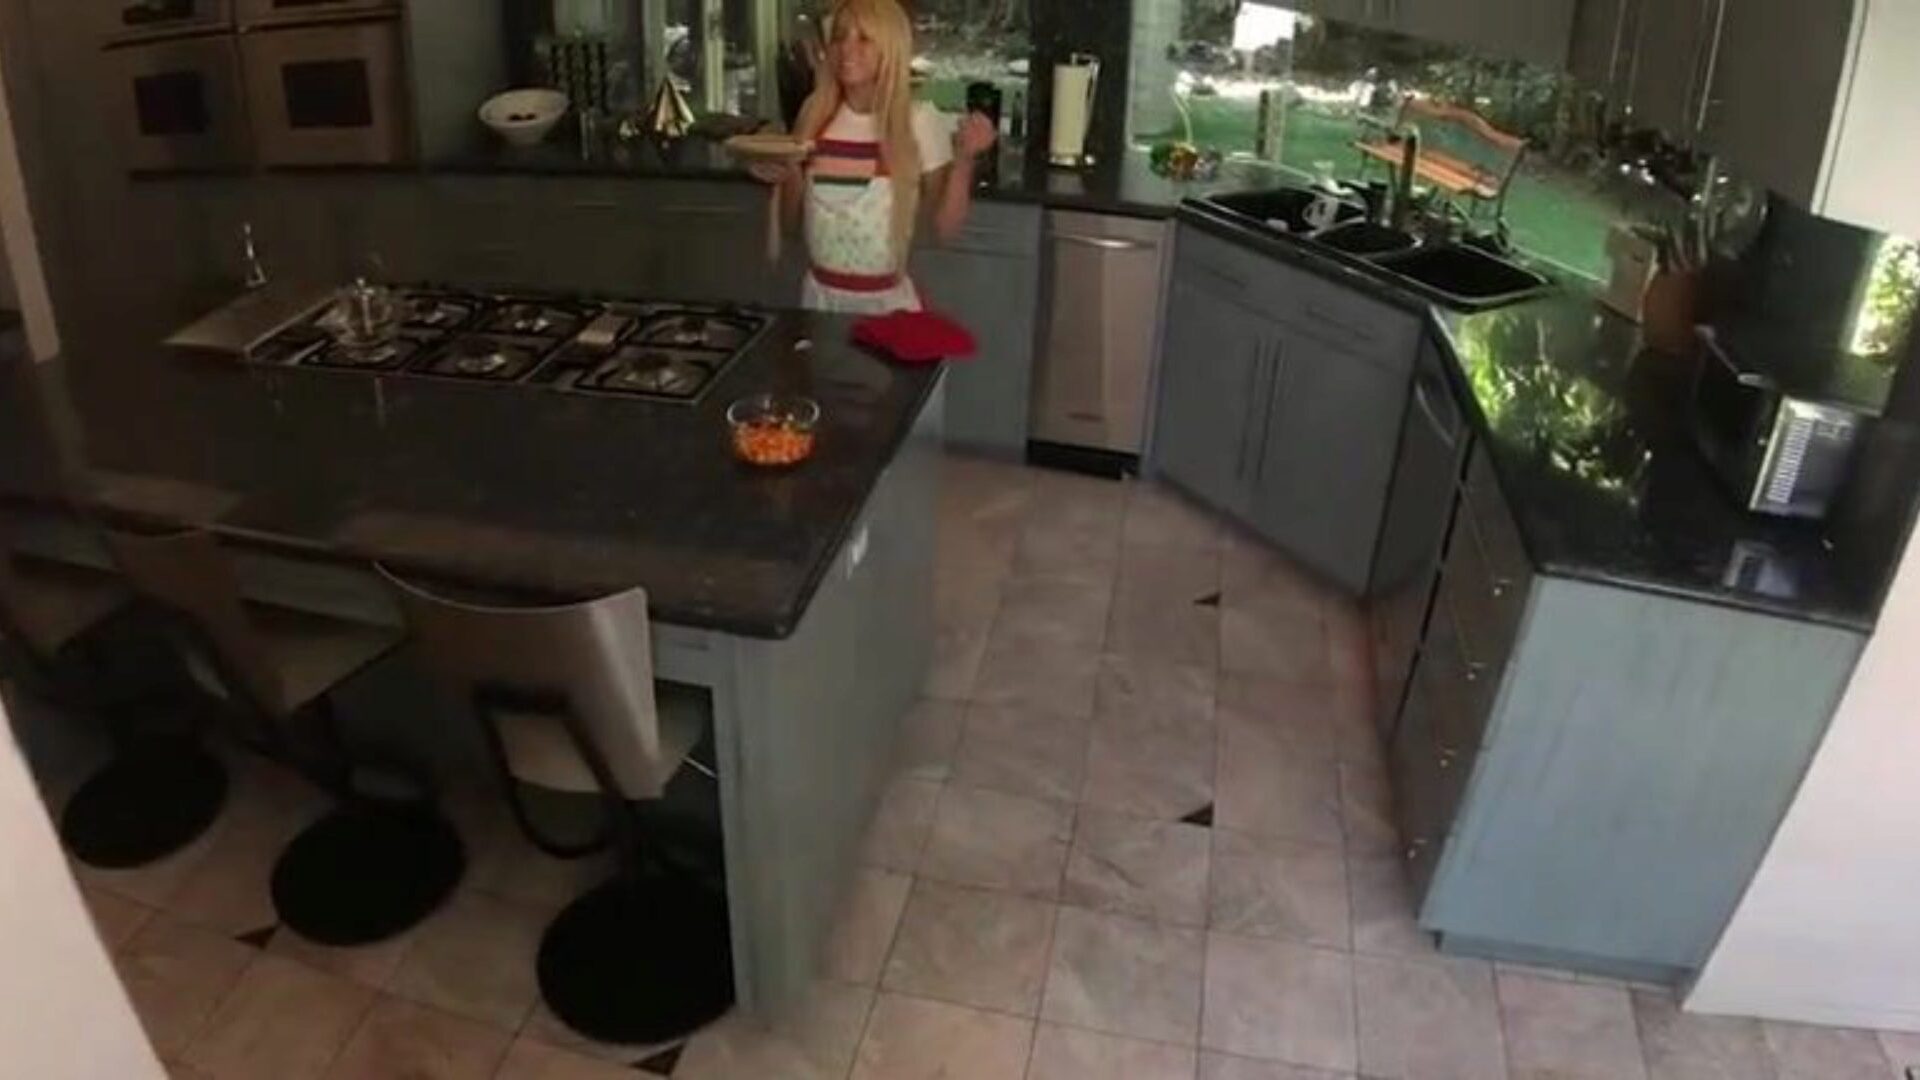 Golden-Haired wife power fed with knob for Thanksgiving POV Kenzie is a highly enthusiastic housewife, thankfully her snatch tastes greater amount good than her cooking! This super-cute blonde newlywed is so kinky it made husband cum real firm a unfathomable inside her!